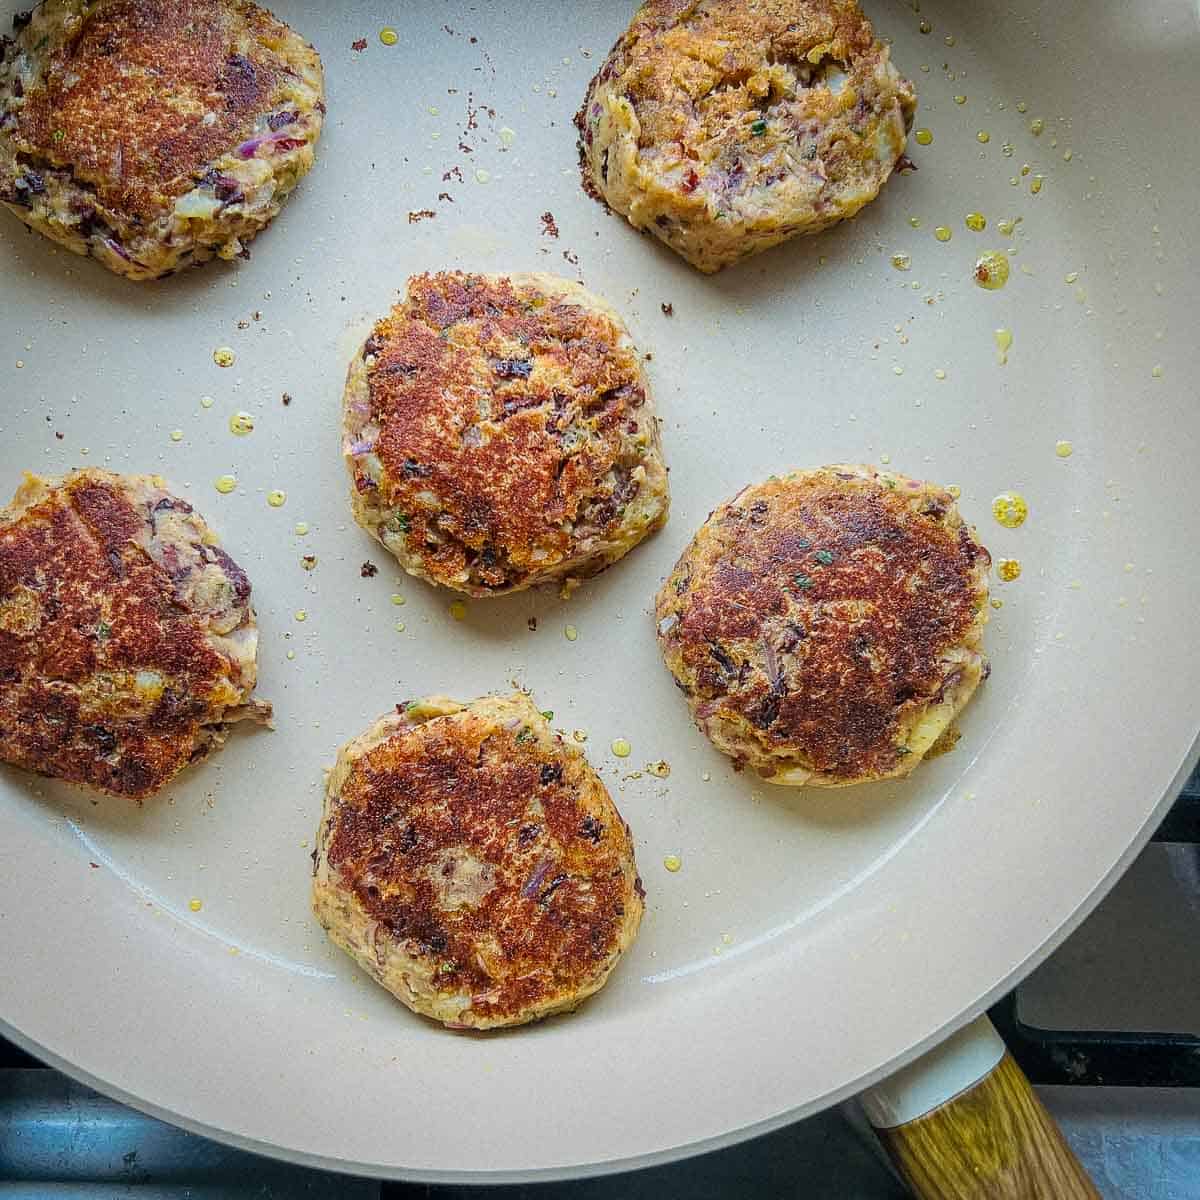 Cooked patties in a frying pan.